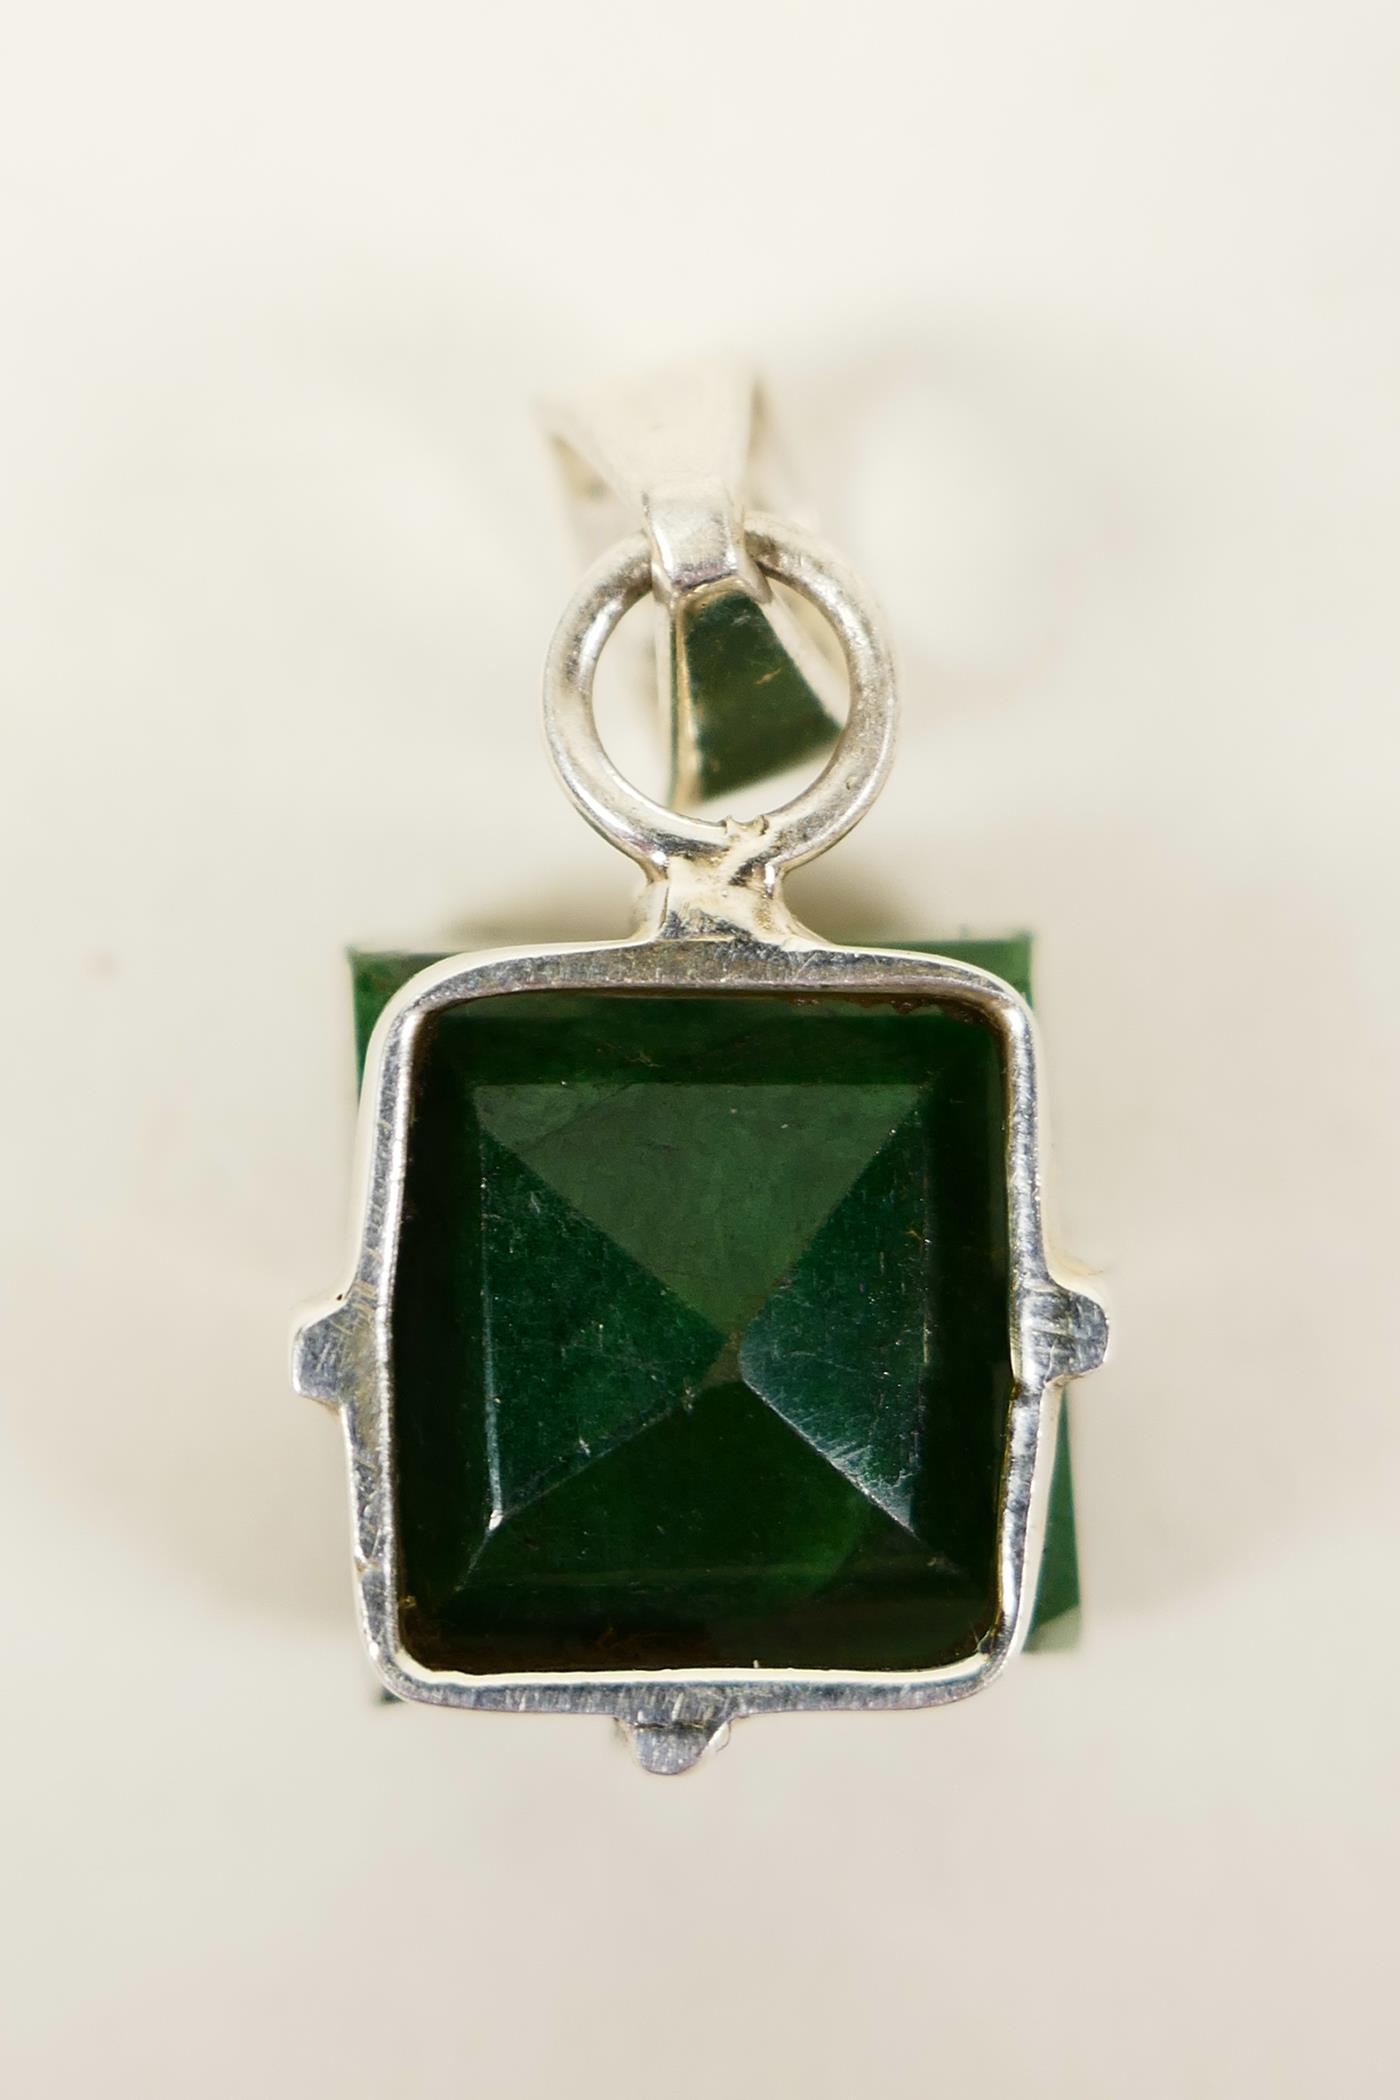 A striking pendant featuring a 12ct square cut natural green emerald, set in sterling silver, - Image 3 of 5